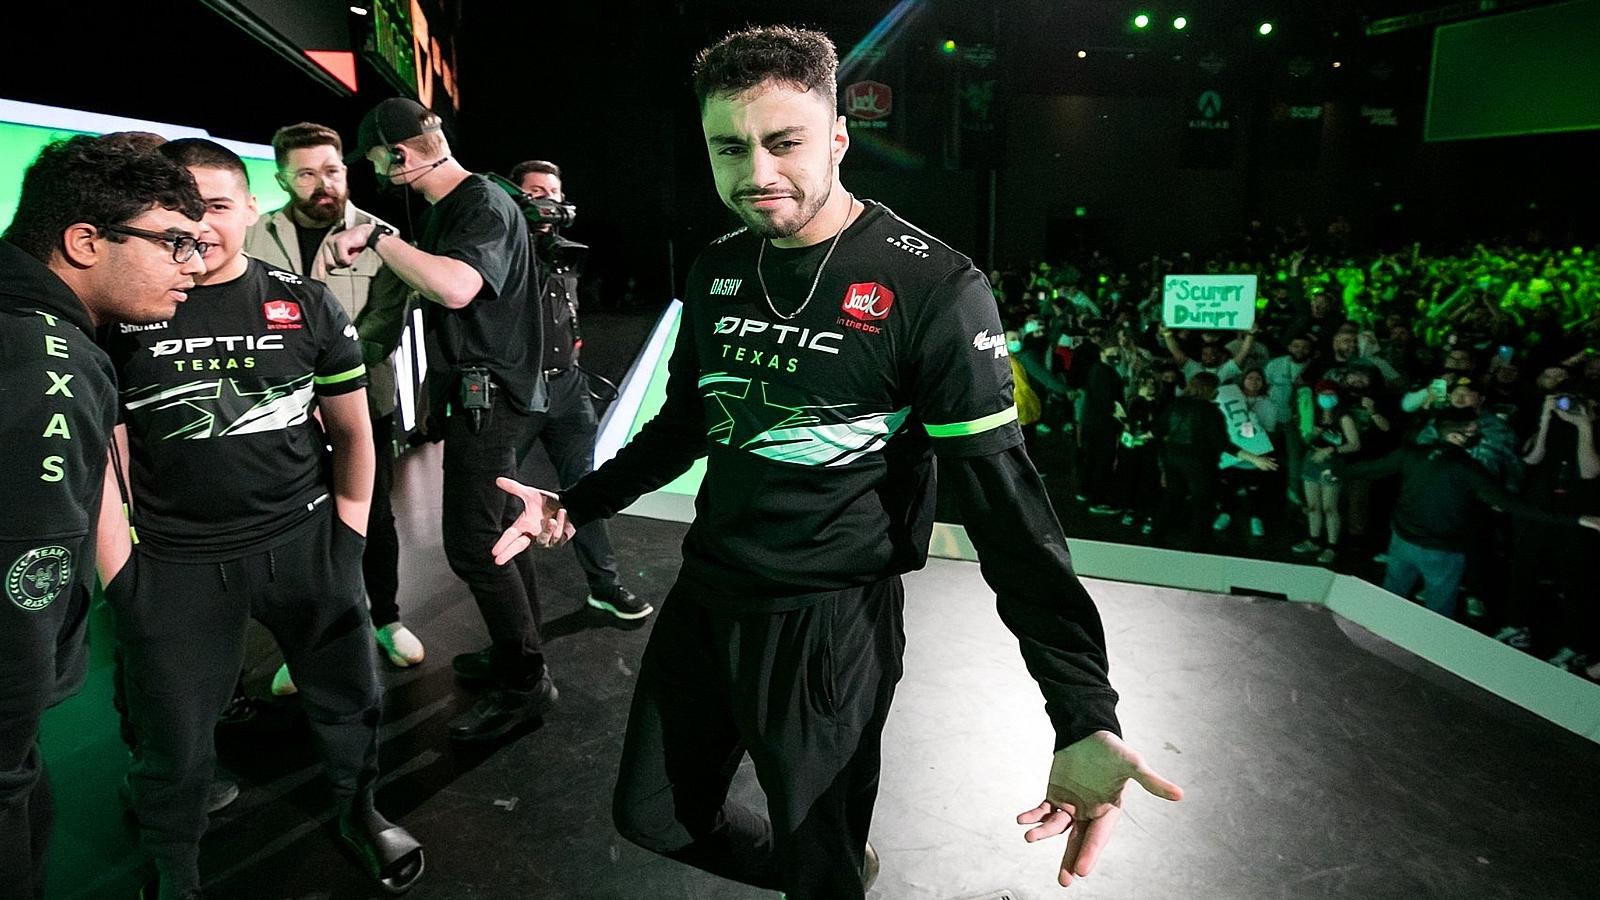 Dashy out, Huke in for OpTic Texas, Call of Duty League News